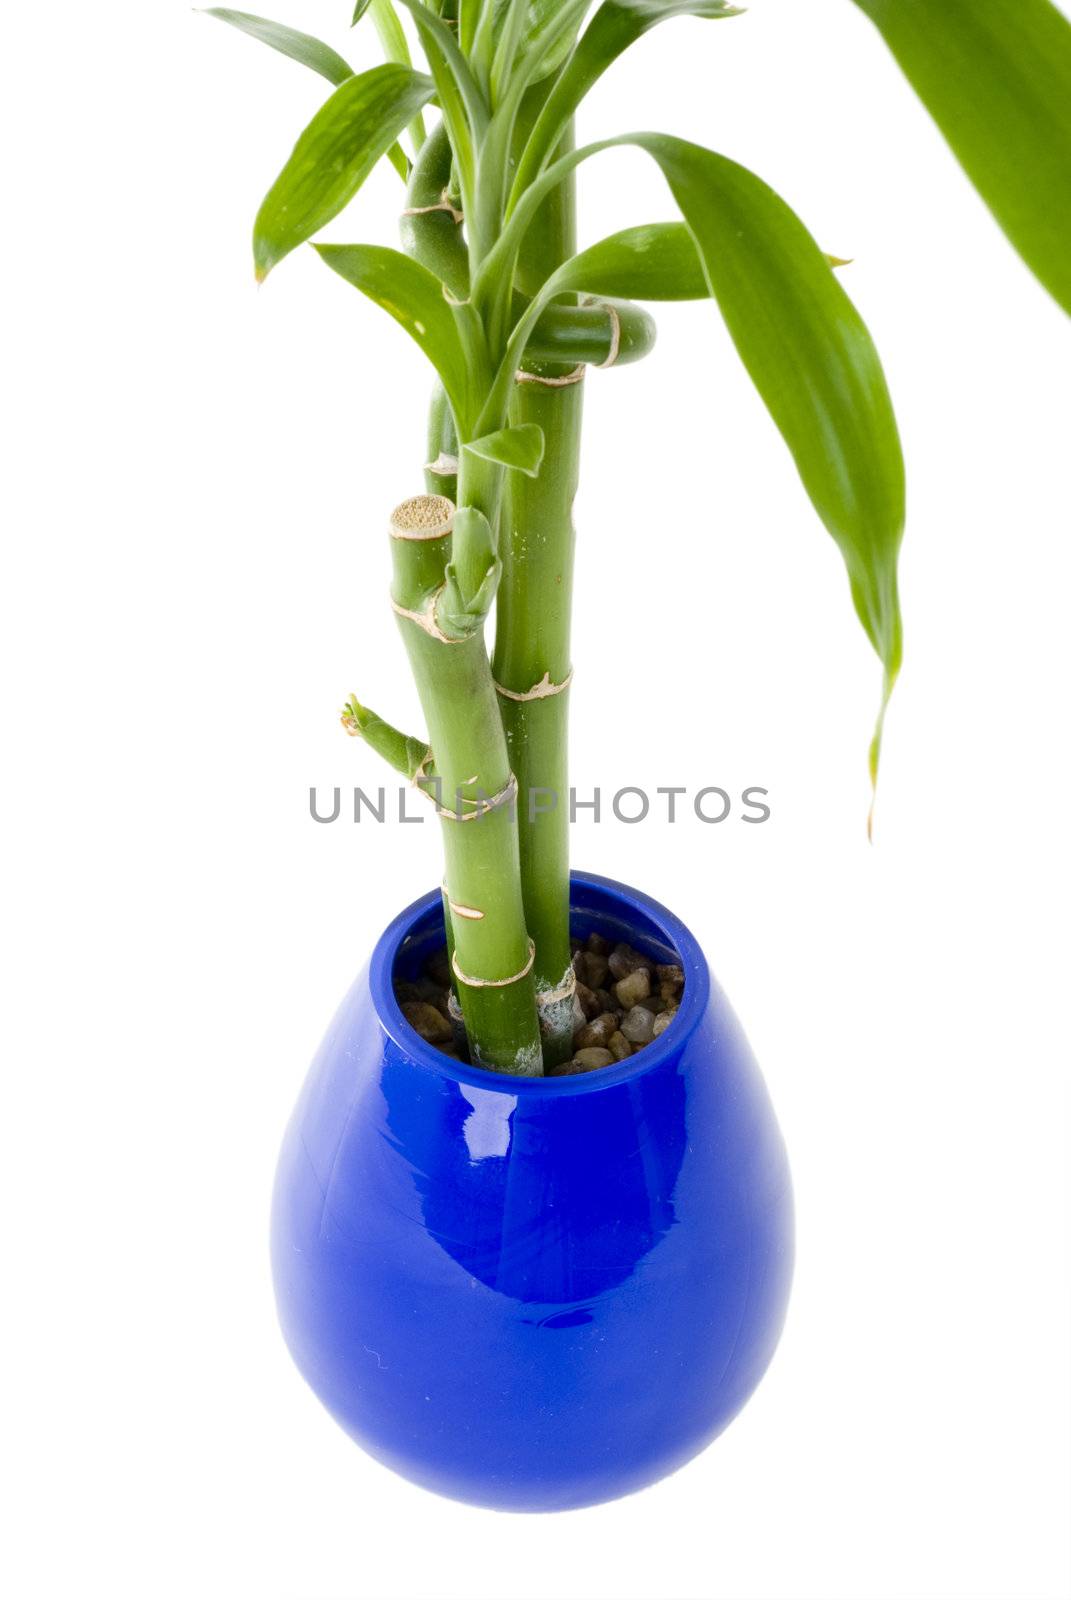 A green plant in a blue vase on an isolated background.